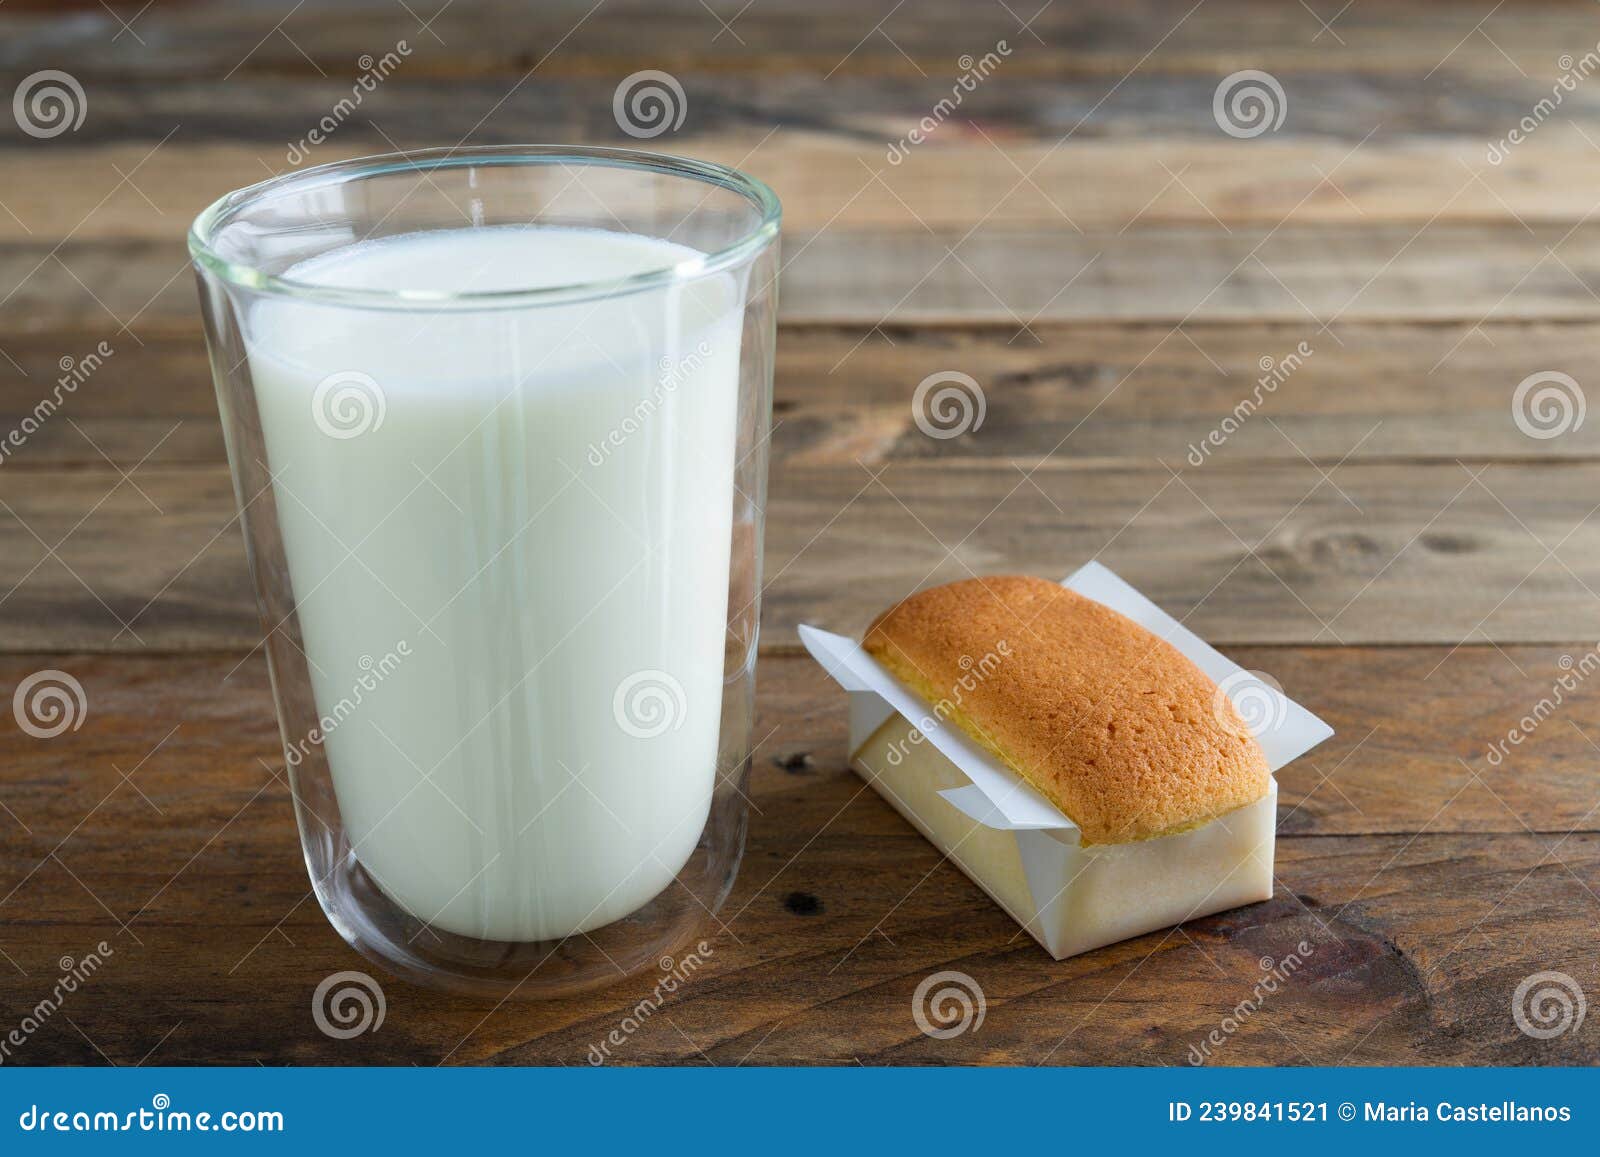 handmade cupcake and glass of milk on a wooden background. copy space. handmade traditional spanish